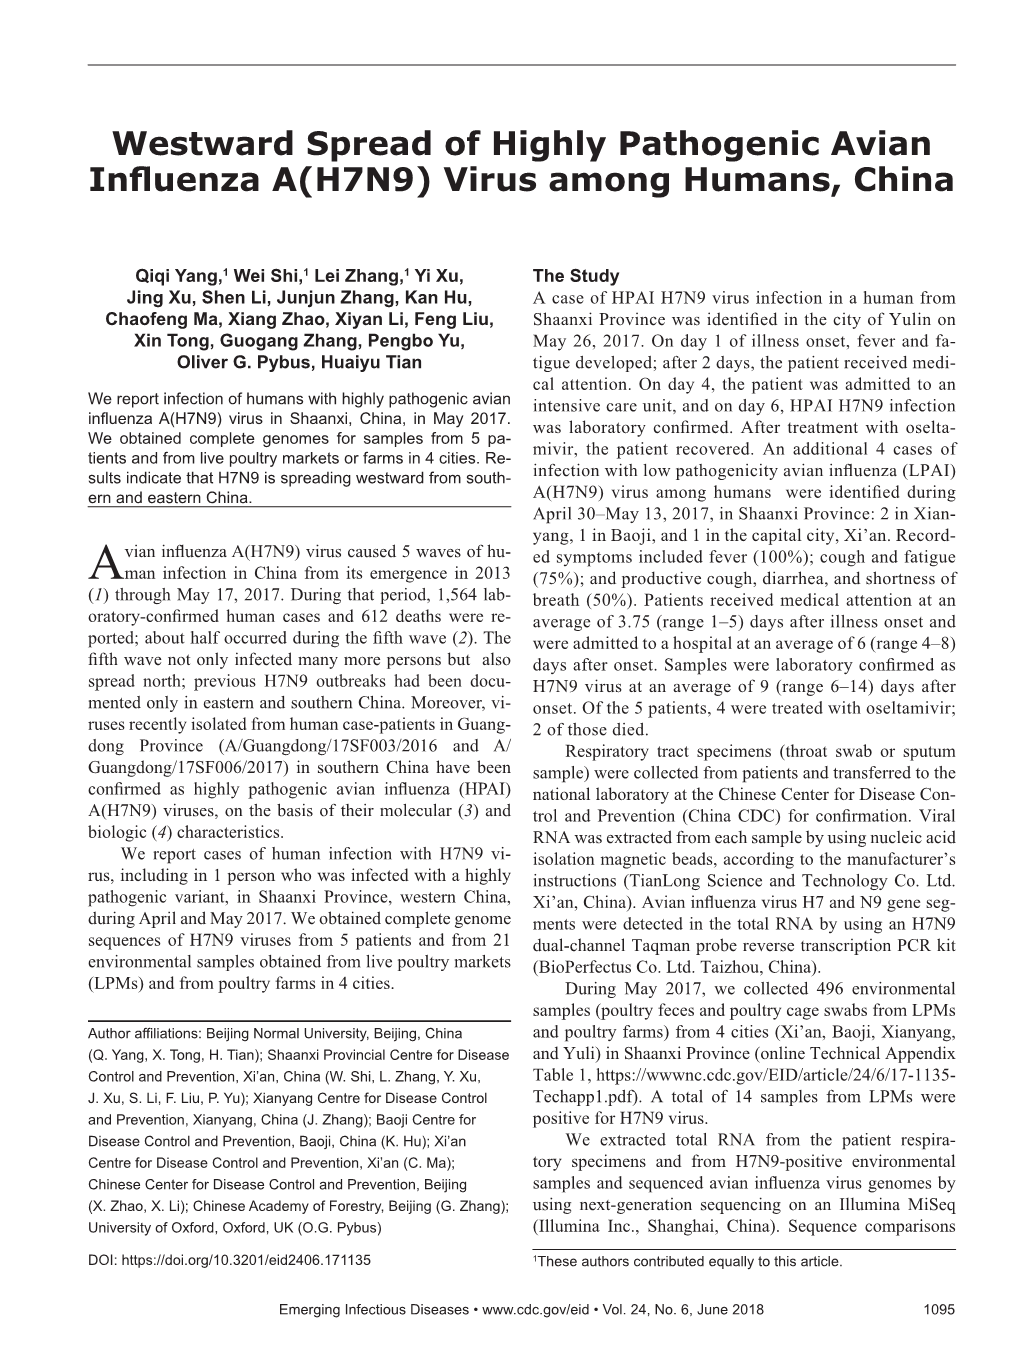 Westward Spread of Highly Pathogenic Avian Influenza A(H7N9) Virus Among Humans, China